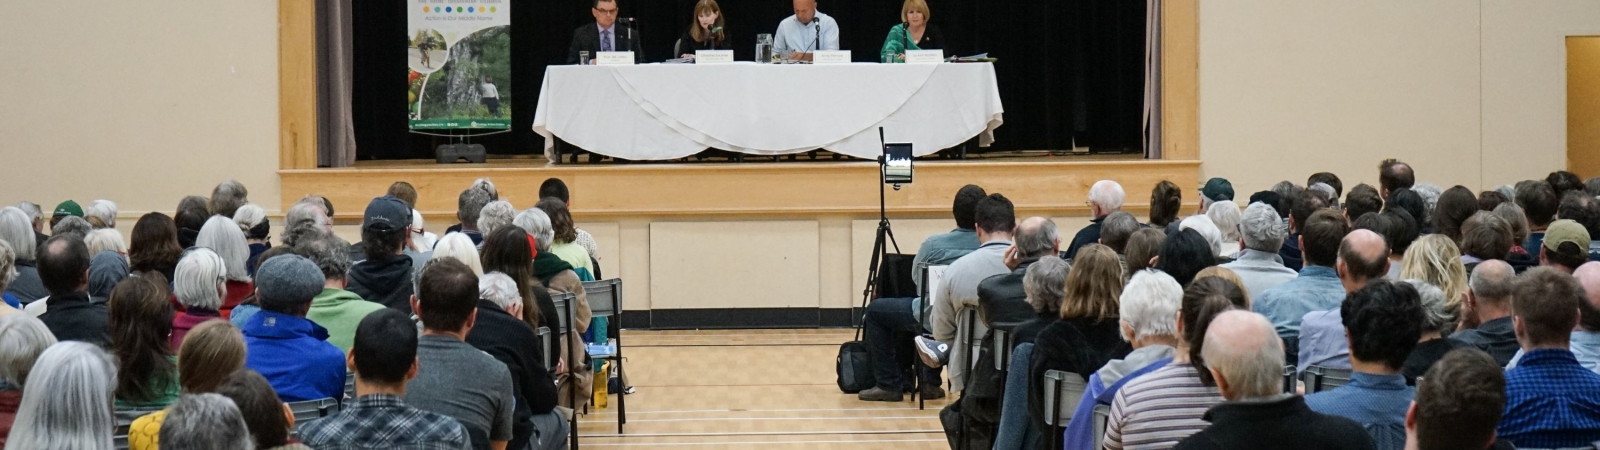 a large group of people watching an election debate with four people at a table  with a white table clothe on a stage.